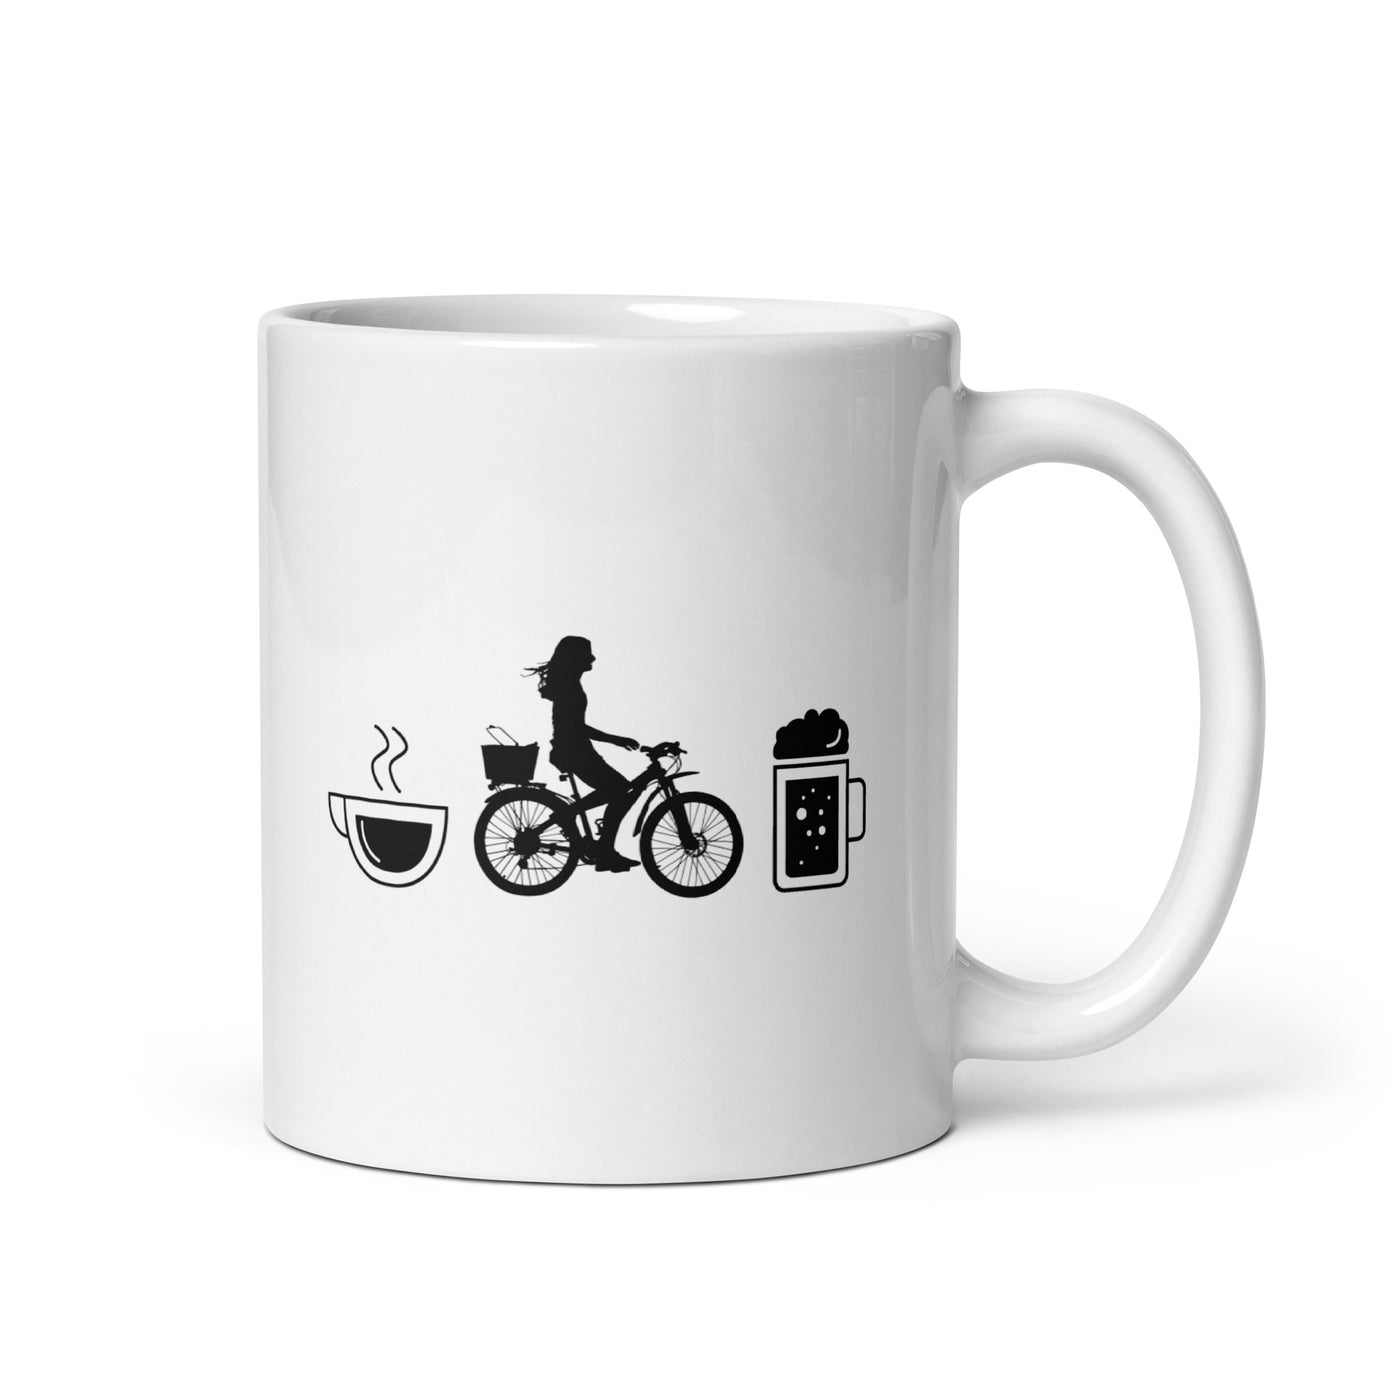 Coffee Beer And Cycling - Tasse fahrrad